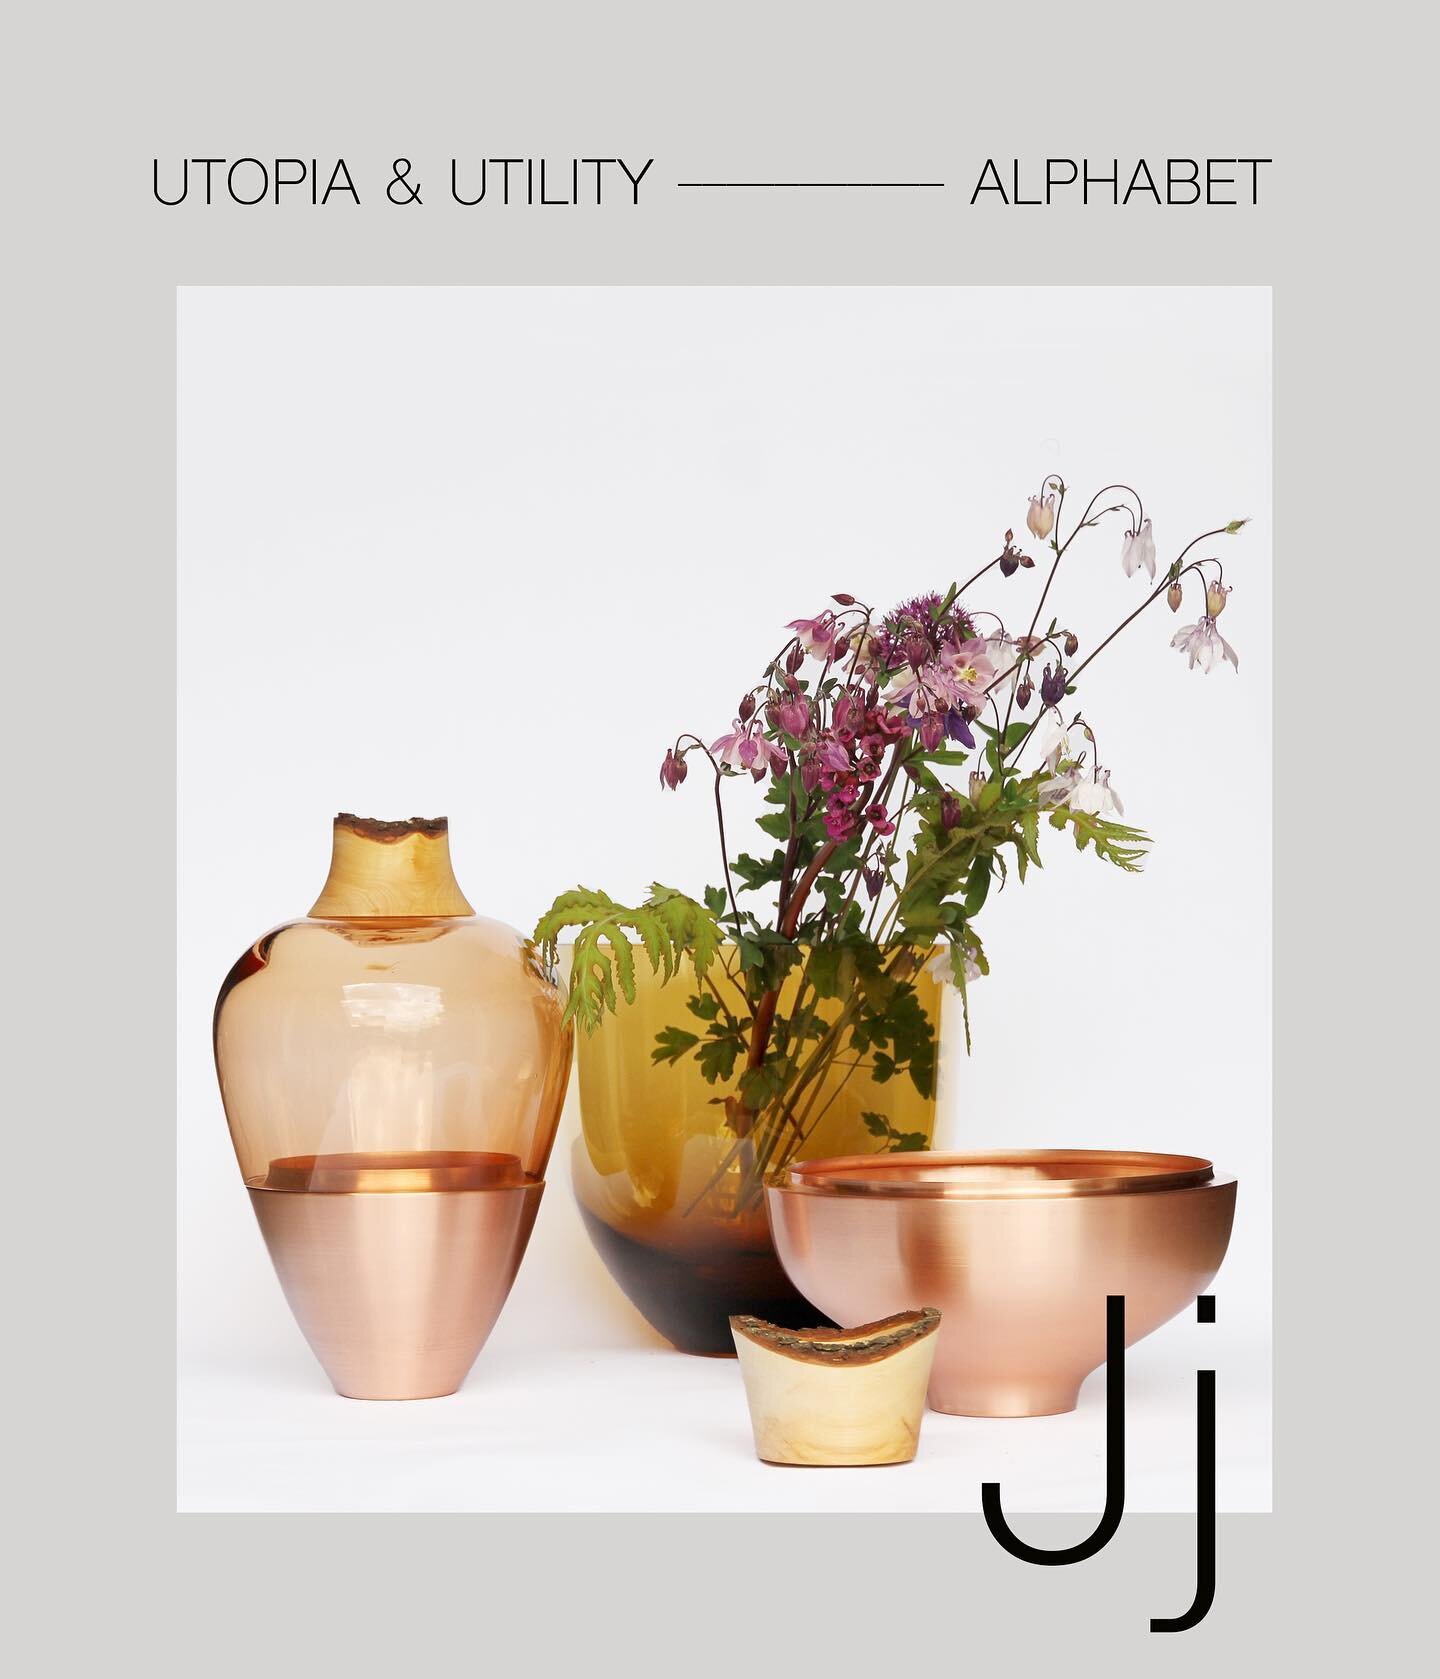 j stands for JOY
Feeling elevated and fulfilled by the work we do, and by the output into this world, is what brings joy in the everyday. Work is a big part of life, and the joy we get from it meaningful. 
At utopia we wish to bring joy through the w